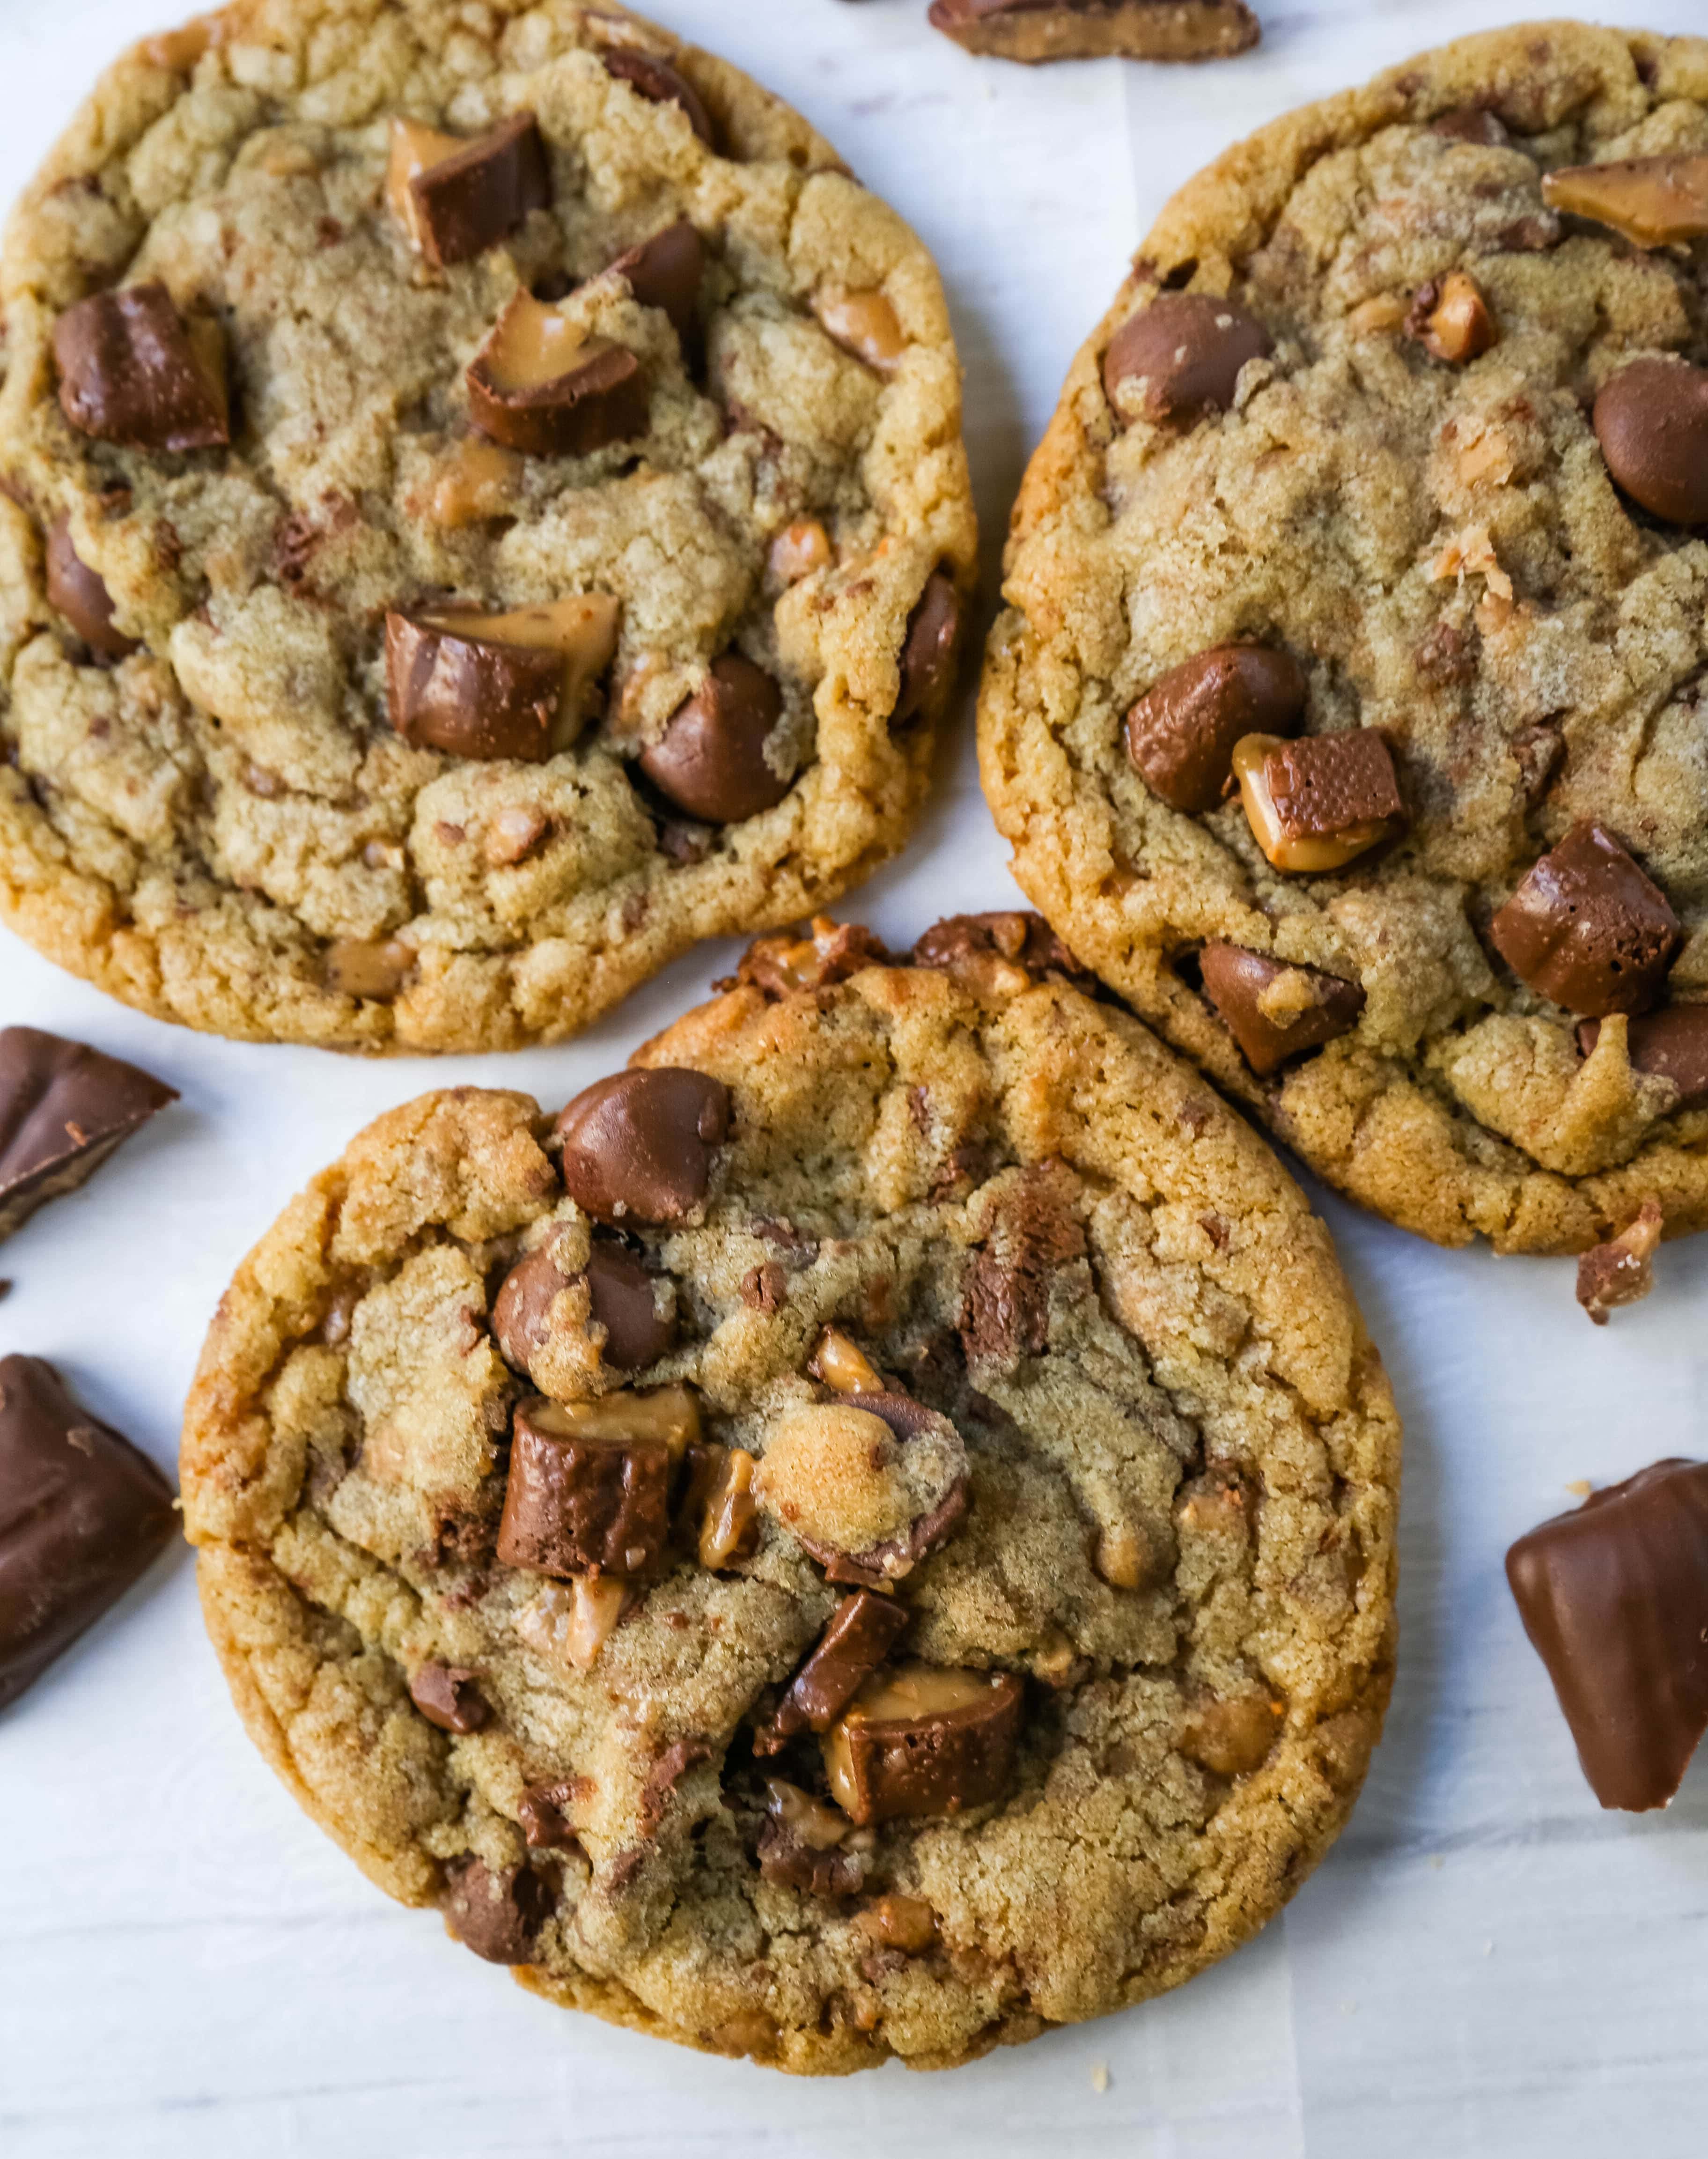 Milk Chocolate Toffee Cookies Buttery rich milk chocolate chip cookies with milk chocolate covered toffee pieces. You are going to fall in love with these browned butter milk chocolate chip toffee cookies! www.modernhoney.com #toffeecookies #milkchocolatetoffeecookies #saucepancookies 